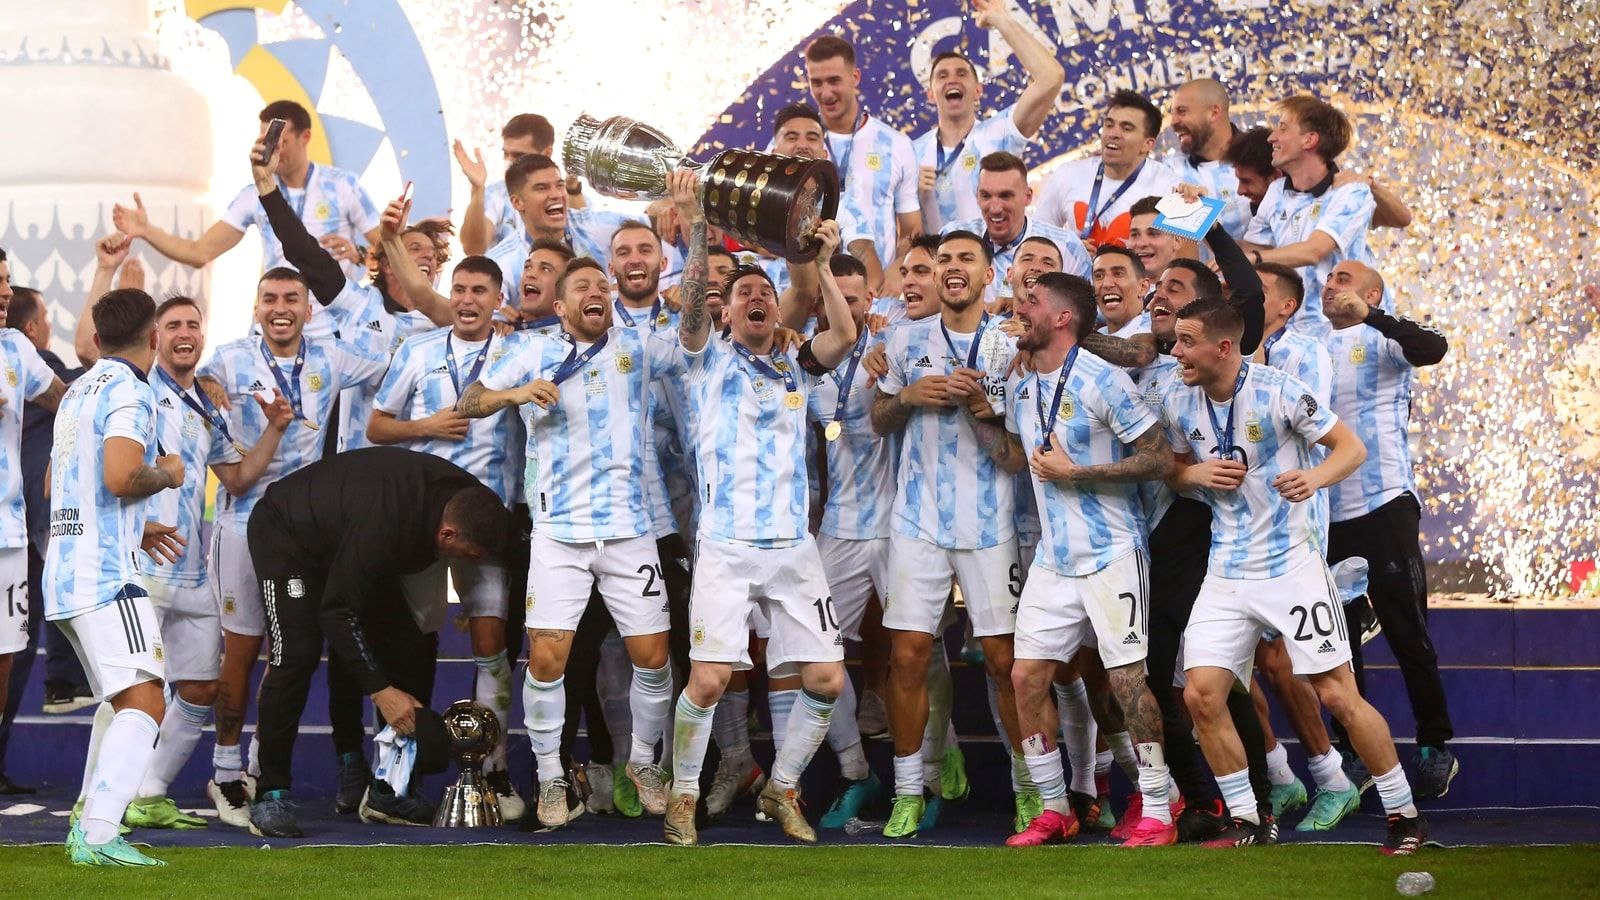 Argentina Team with tophy FIFA World Cup Wallpaper 4k Ultra HD ID11268